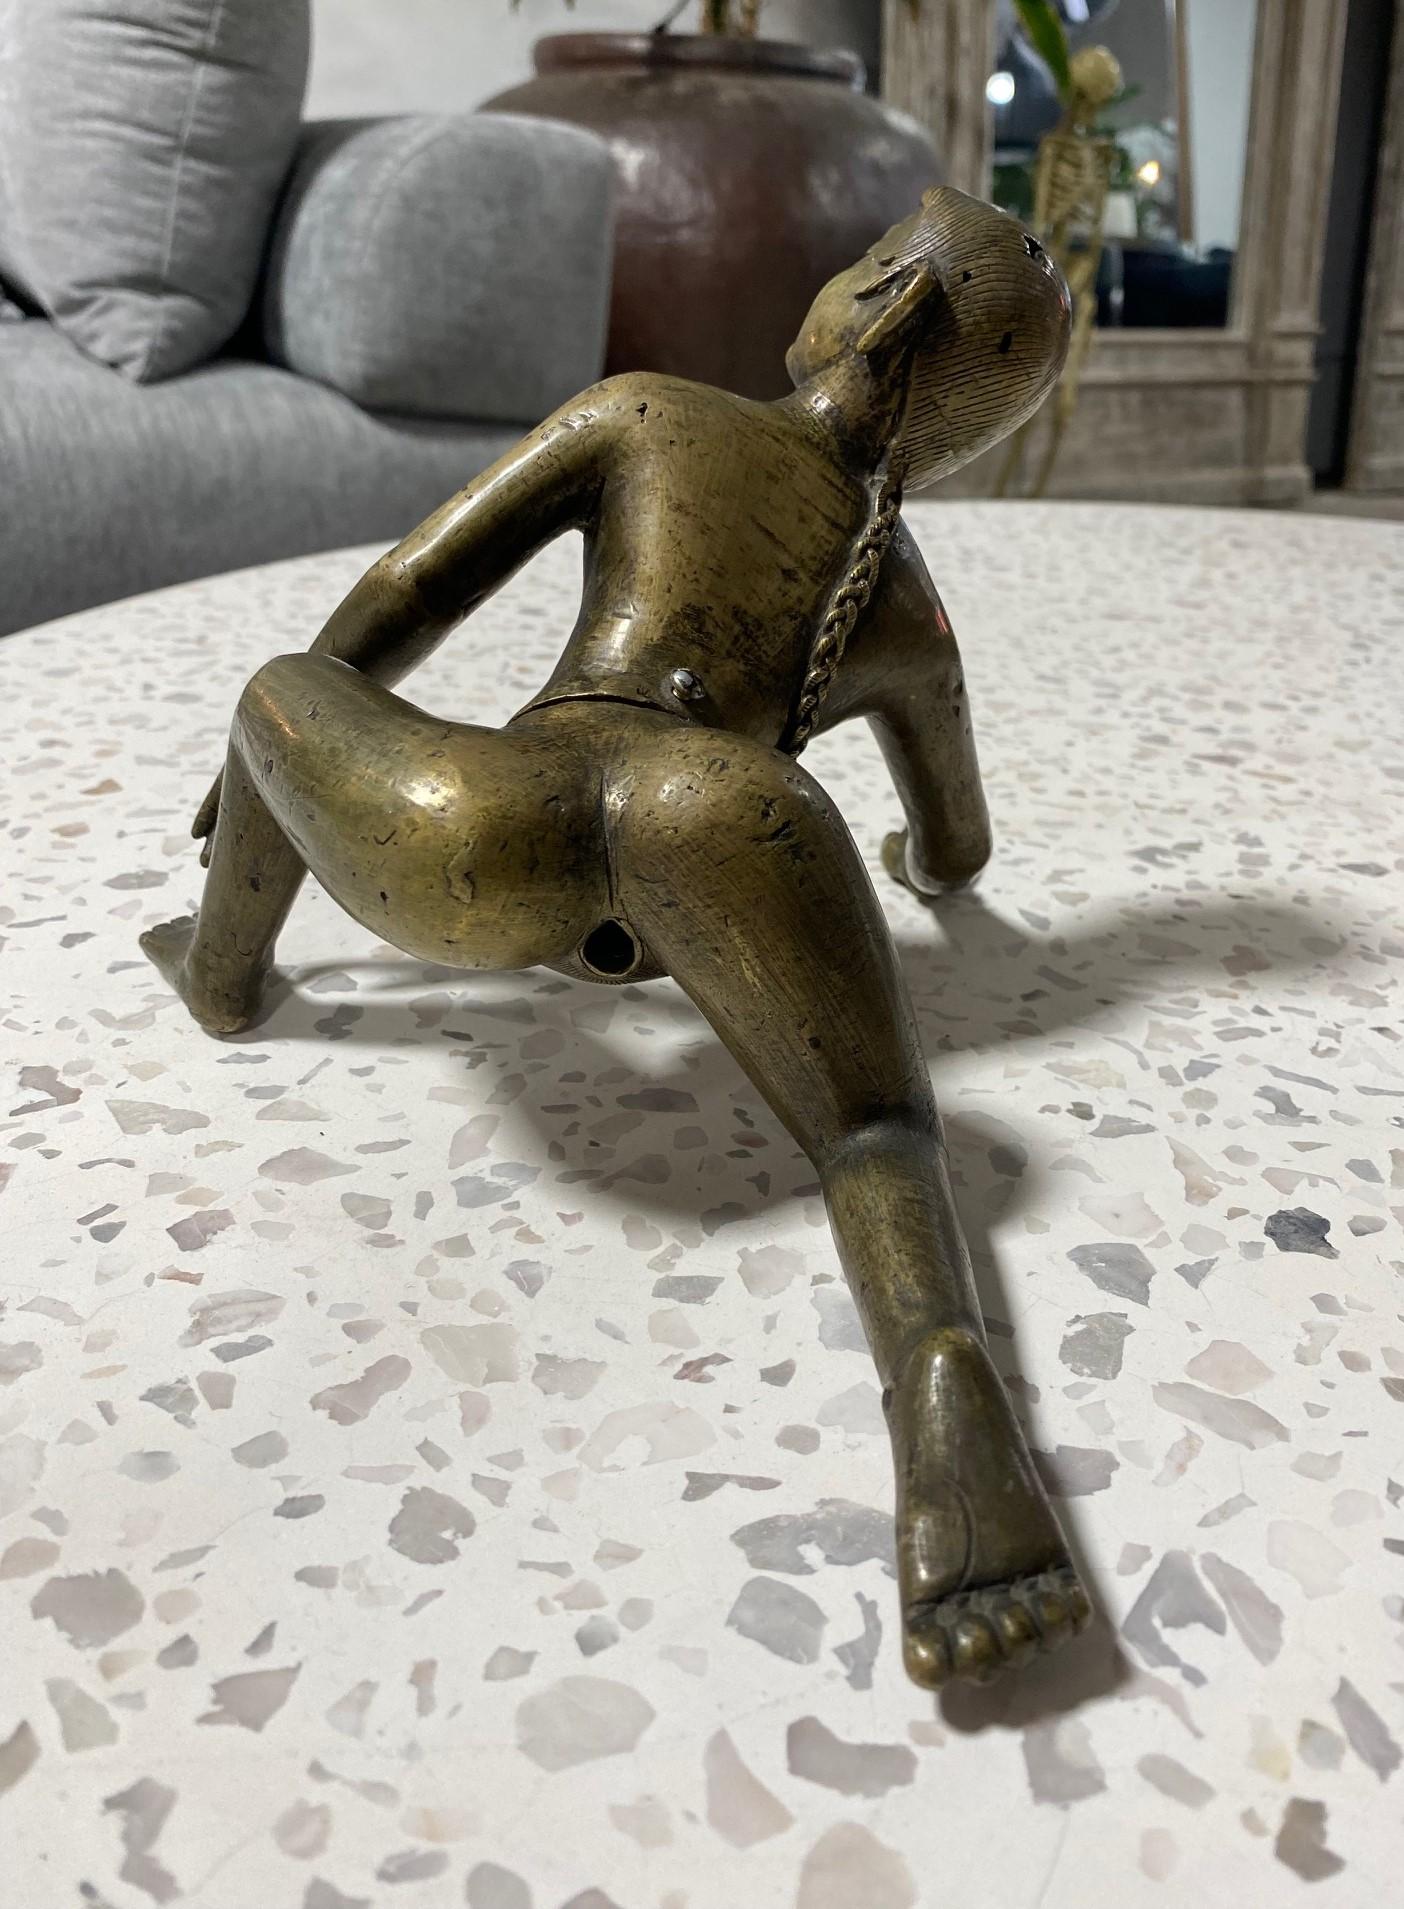 20th Century Indian India South East Asian Erotic Heavy Bronze Kama Sutra Figures Sculpture For Sale